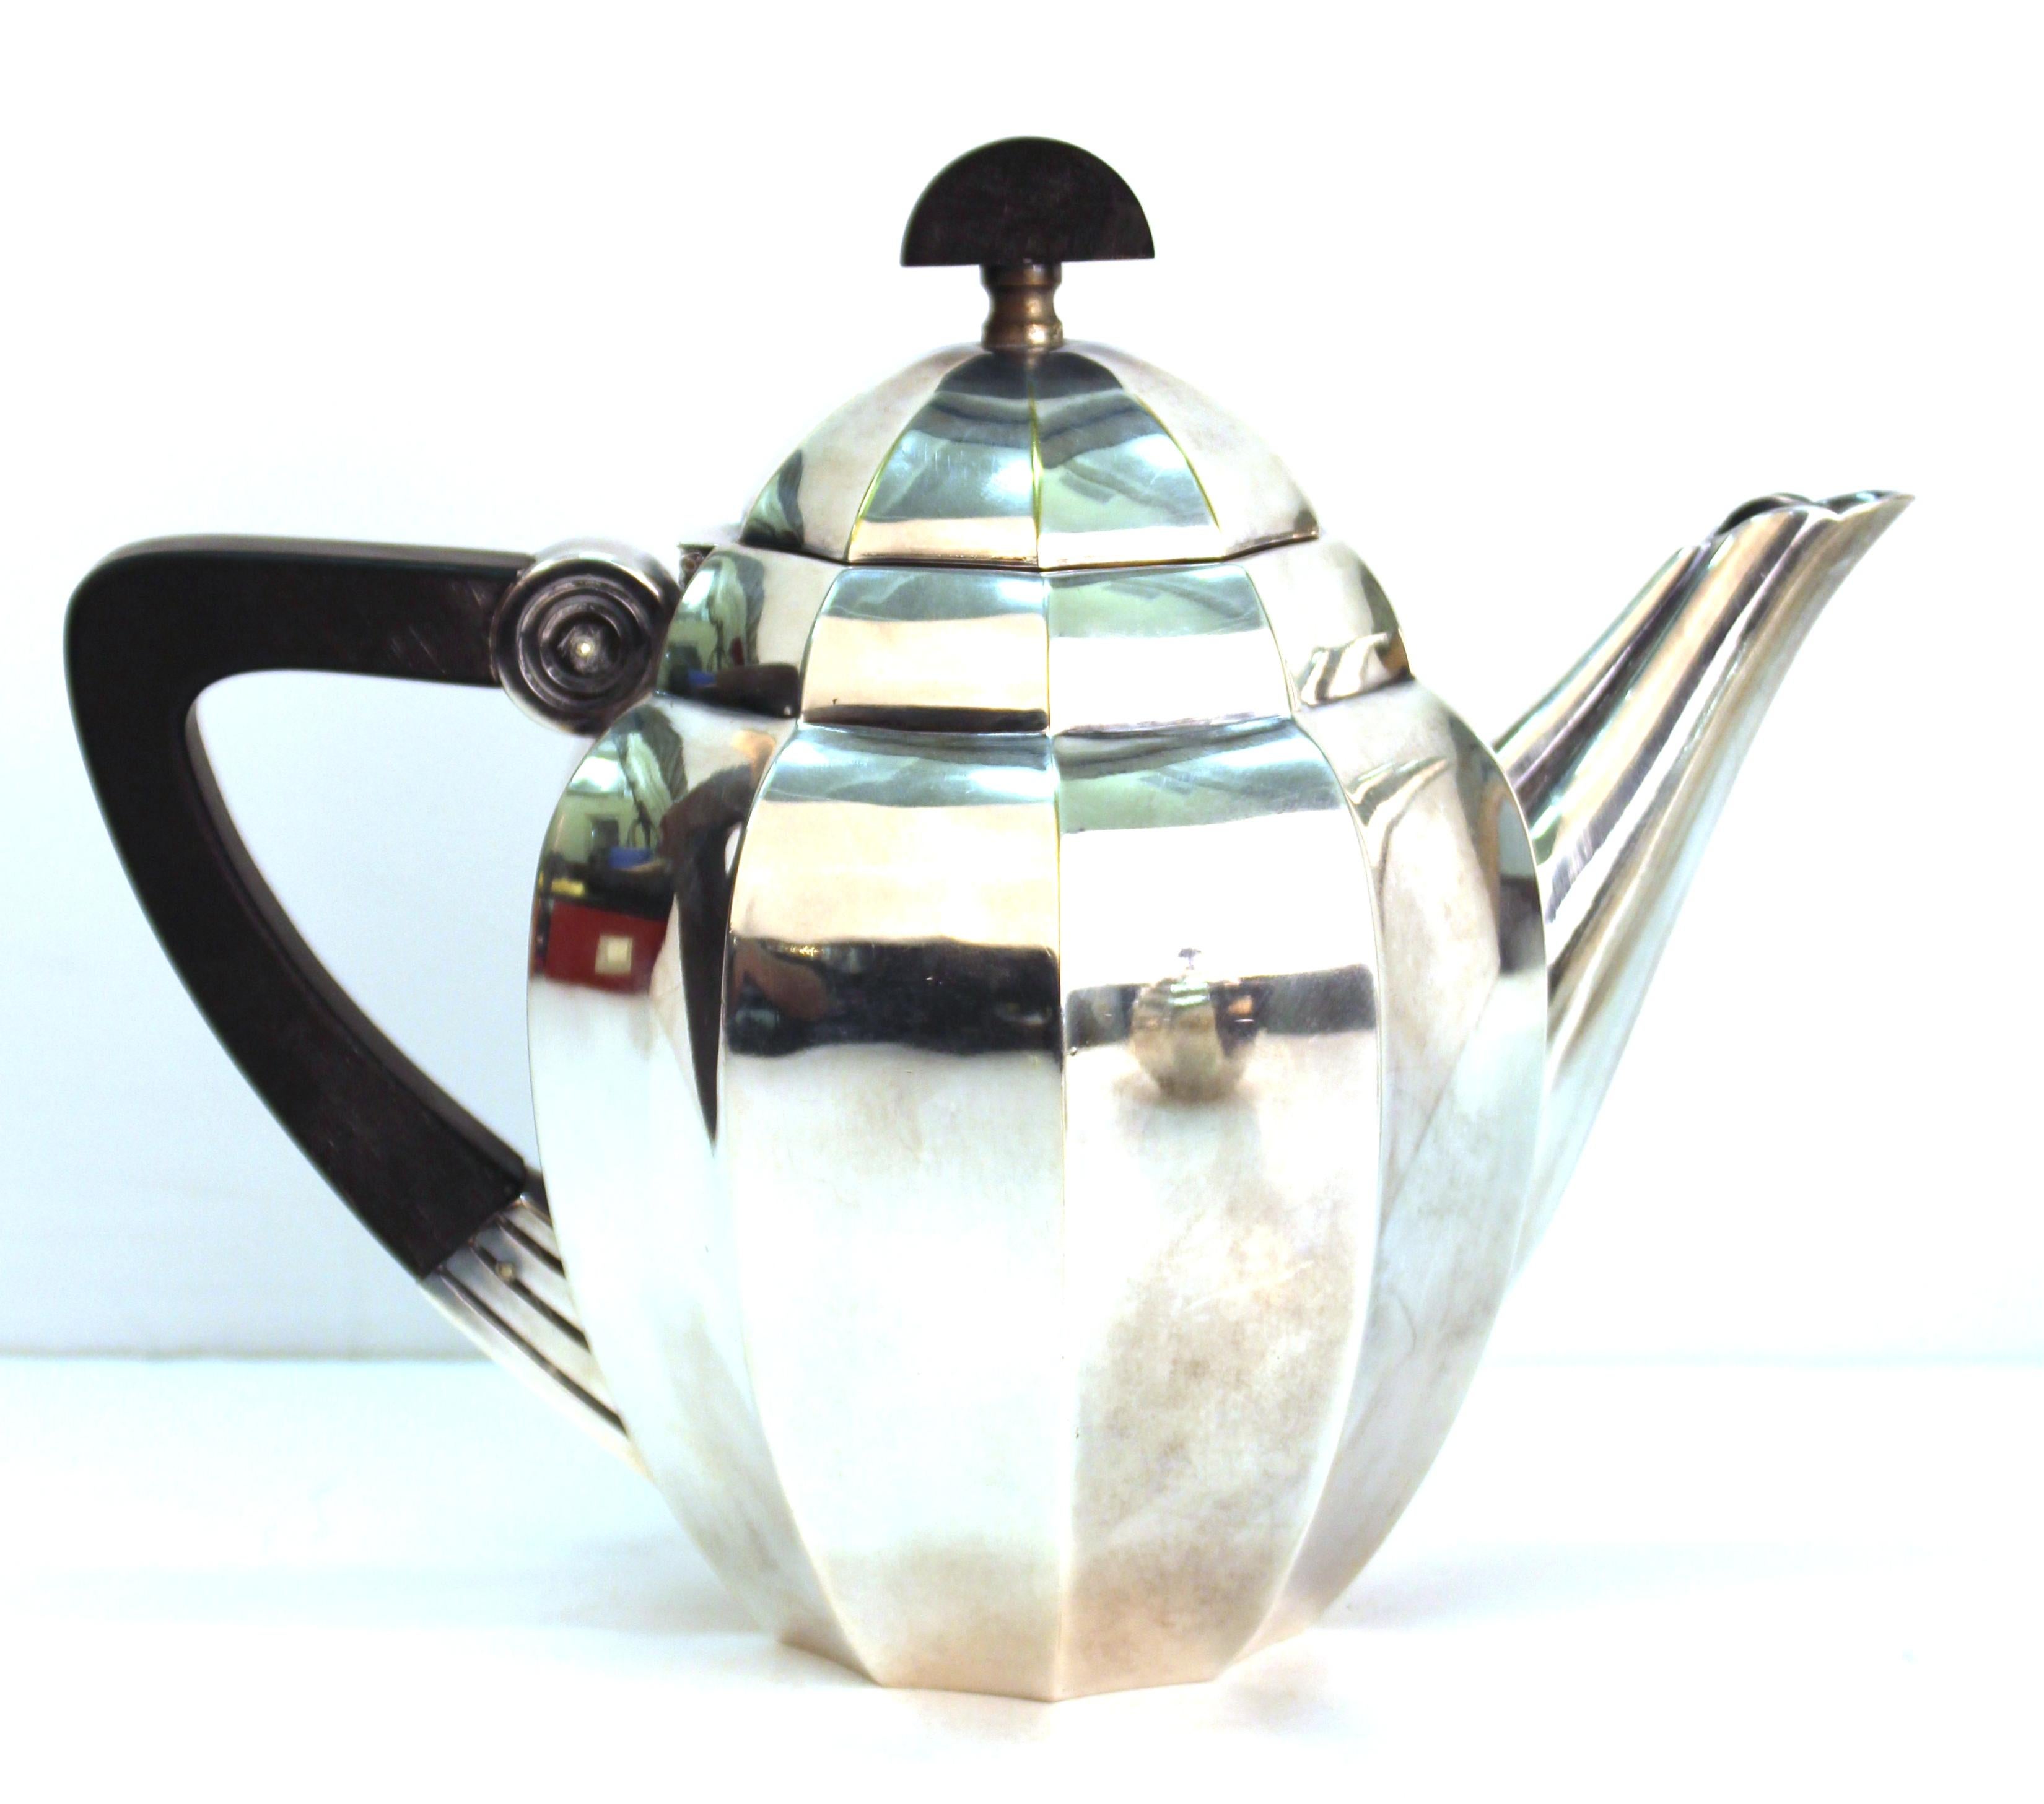 French Art Deco silver plated tea set with ebony handles, created in circa 1925 by French Decorative Designer Maurice Dufrêne (1876-1955) for Orfevrerie Gallia / Christofle.
Dufrêne was known for his Art Deco designs incorporating structure and